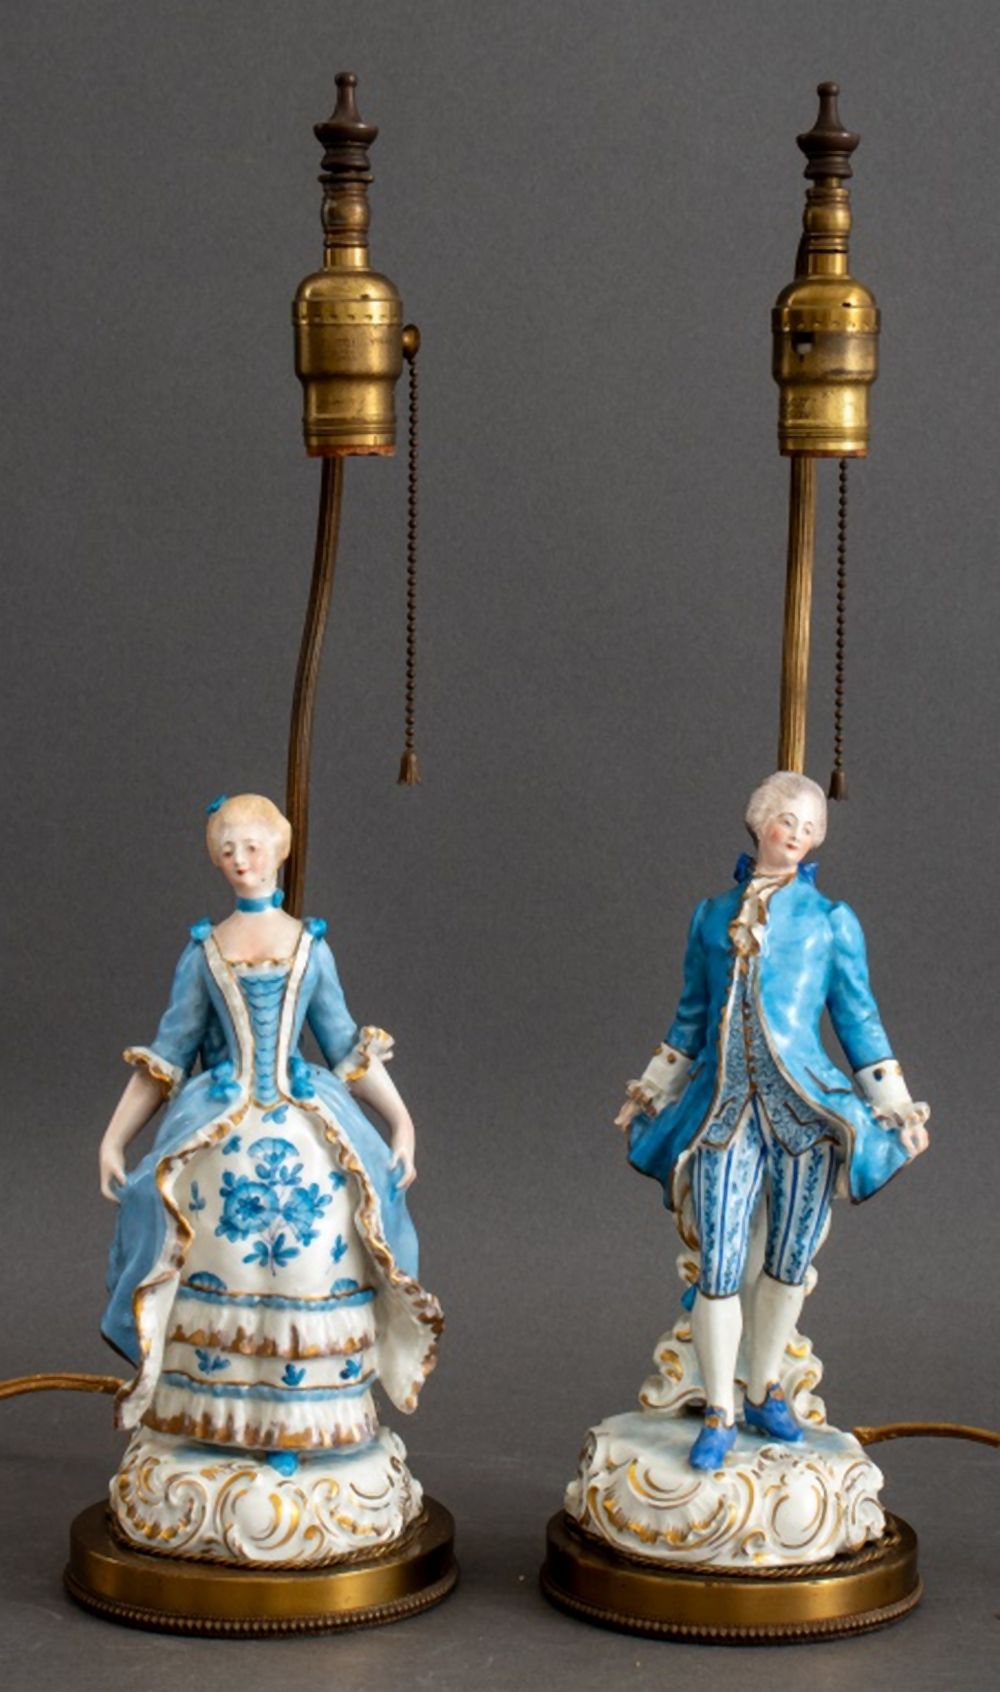 PAIR OF DRESDEN STYLE COURTIERS